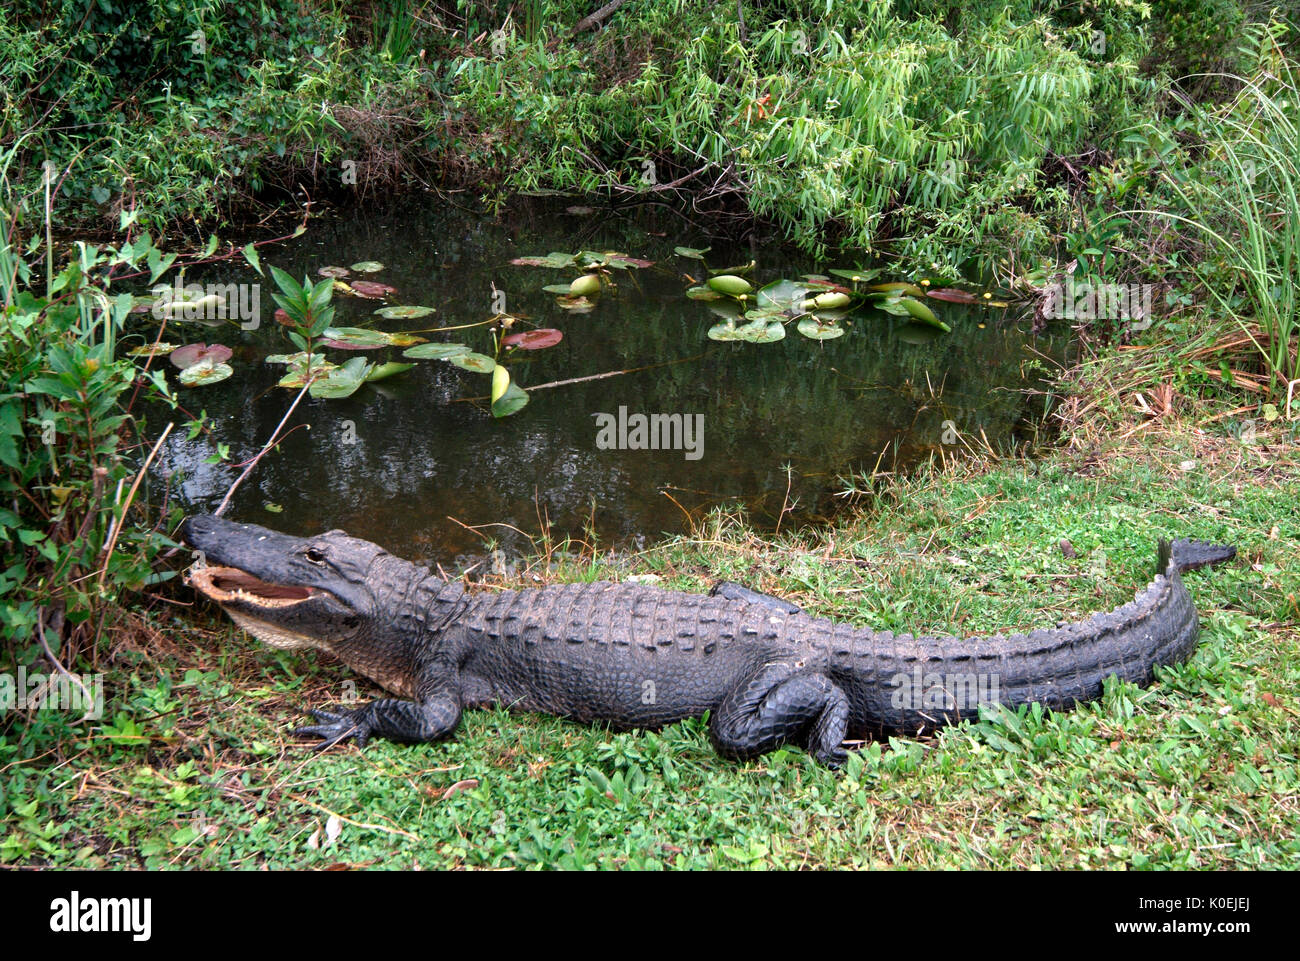 American Alligator, Alligator mississippiensis, adult resting on bank by water, Everglades National Park, predator Stock Photo